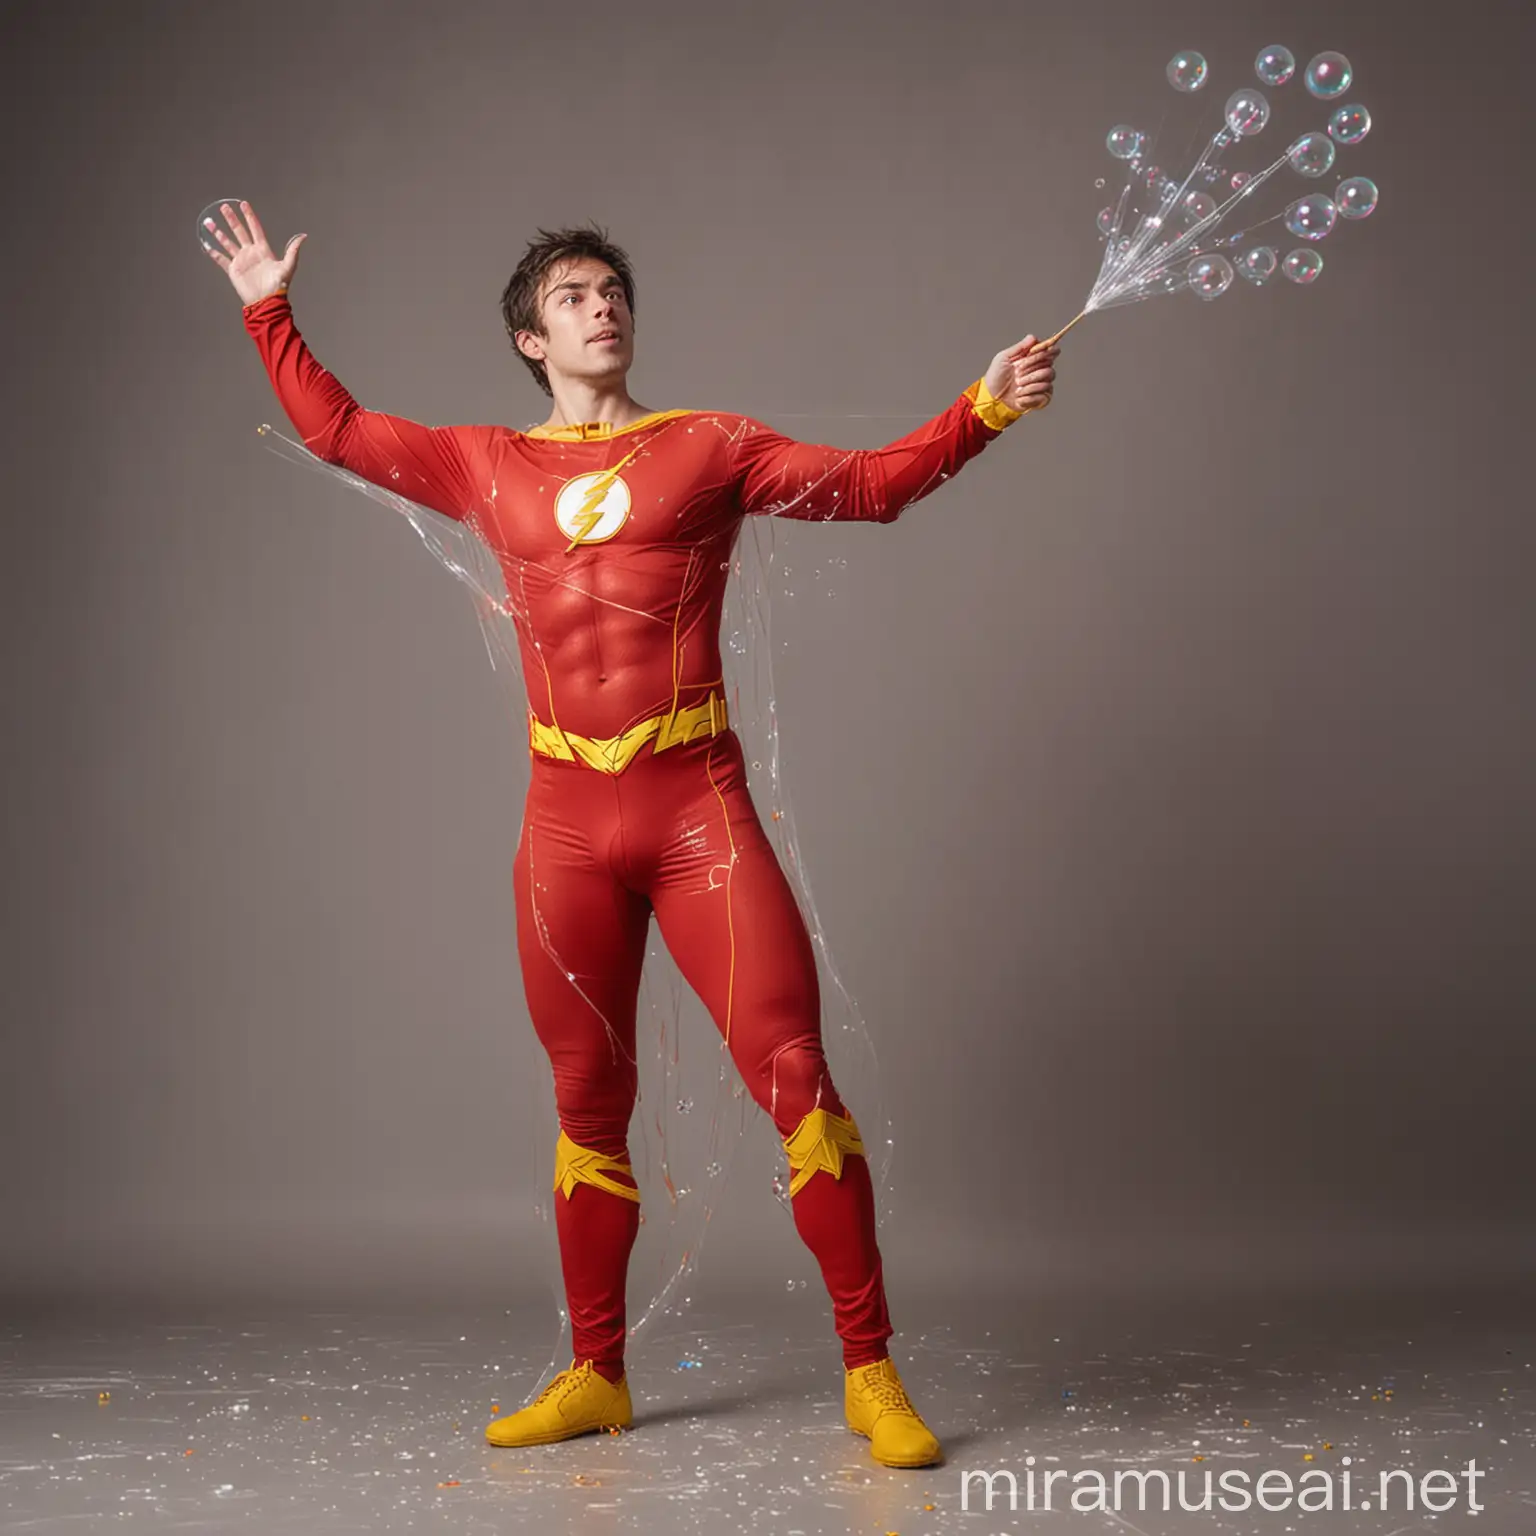 side view full body man, dressed up as the flash making soap bubbles. Arms raised, holding sticks with string 